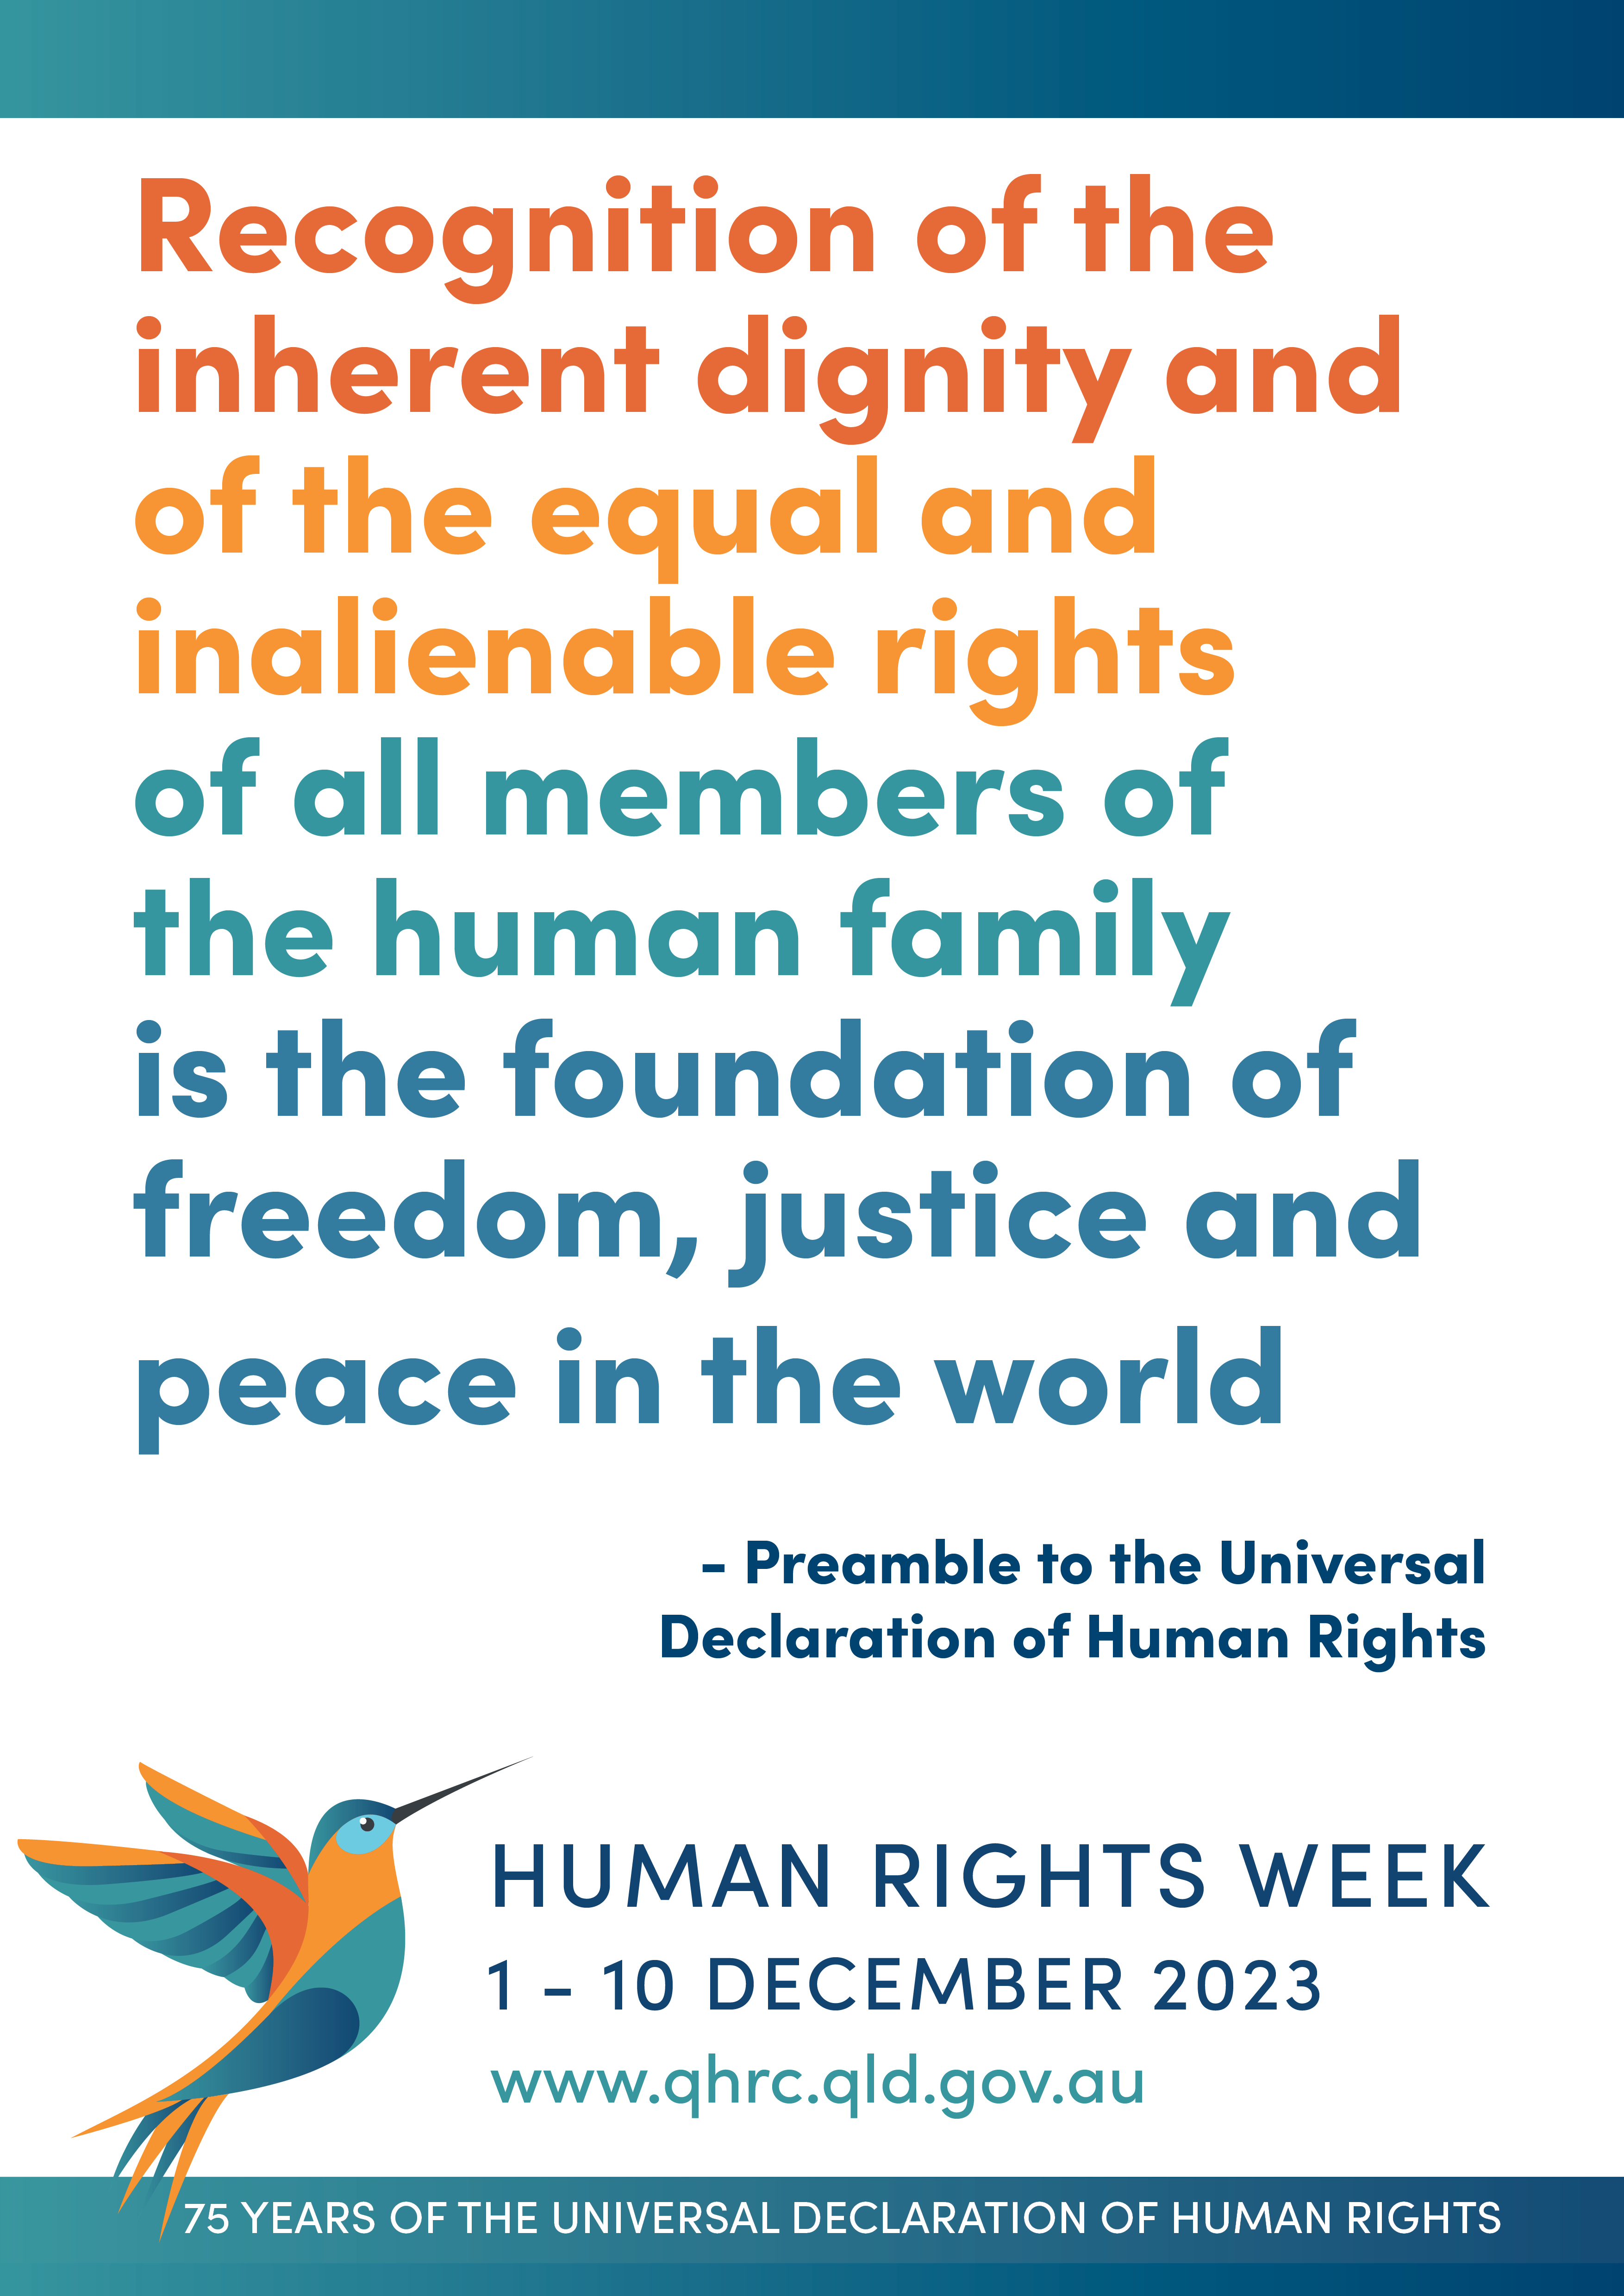 White poster with multicoloured text which reads 'Recognition of the inherent dignity and of the equal and inalienable rights of all members of the human family is the foundation of freedom, justice and peace in the world - Preamble to the Universal Declaration of Human Rights'. The Human Rights Week logo with a multicoloured hummingbird sits underneath. At the bottom a ribbon reads '75 years of the Universal Declaration of Human Rights'.